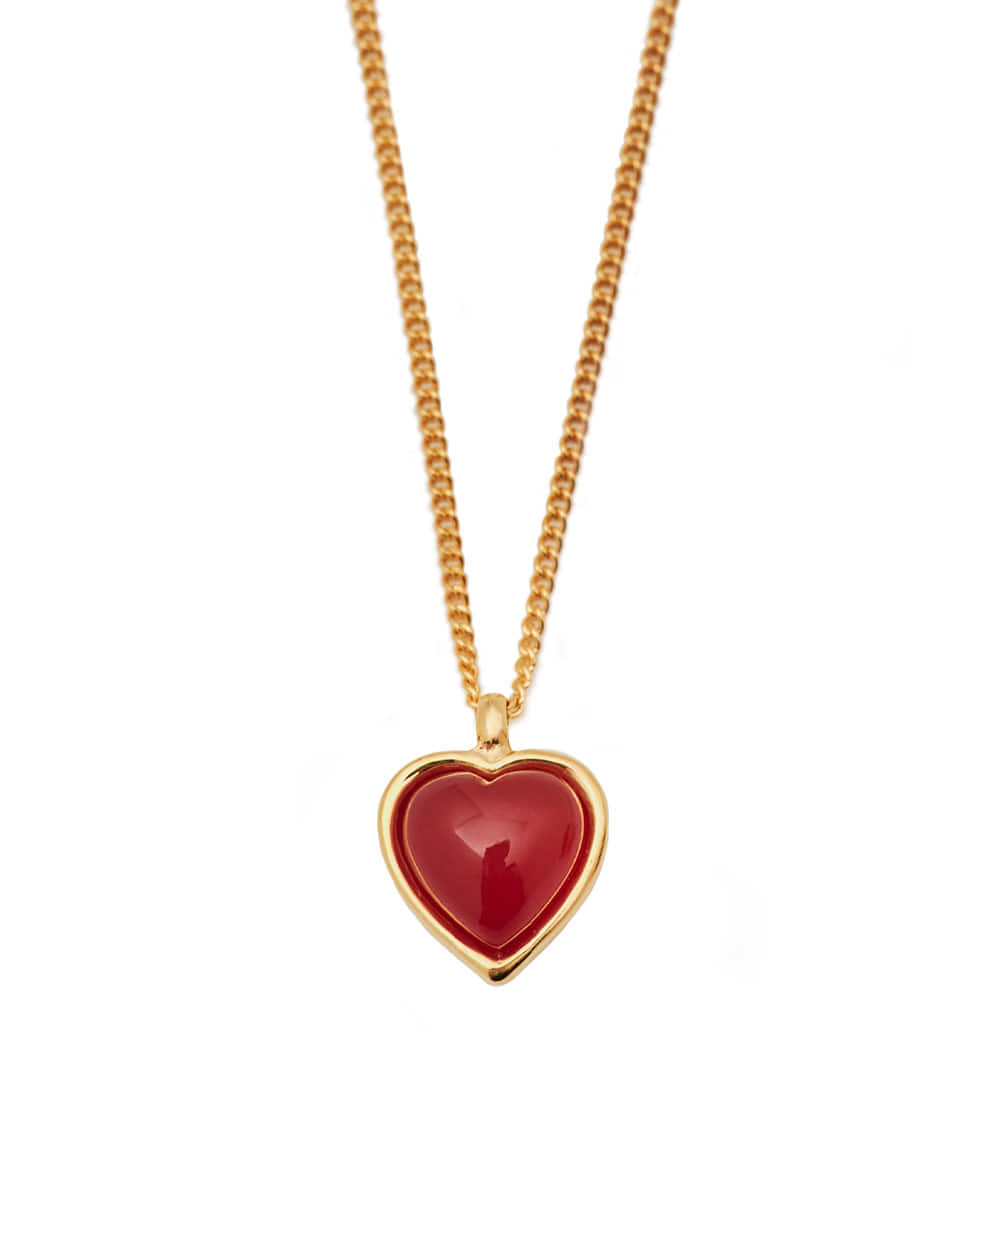 Love charm necklace/ Gold